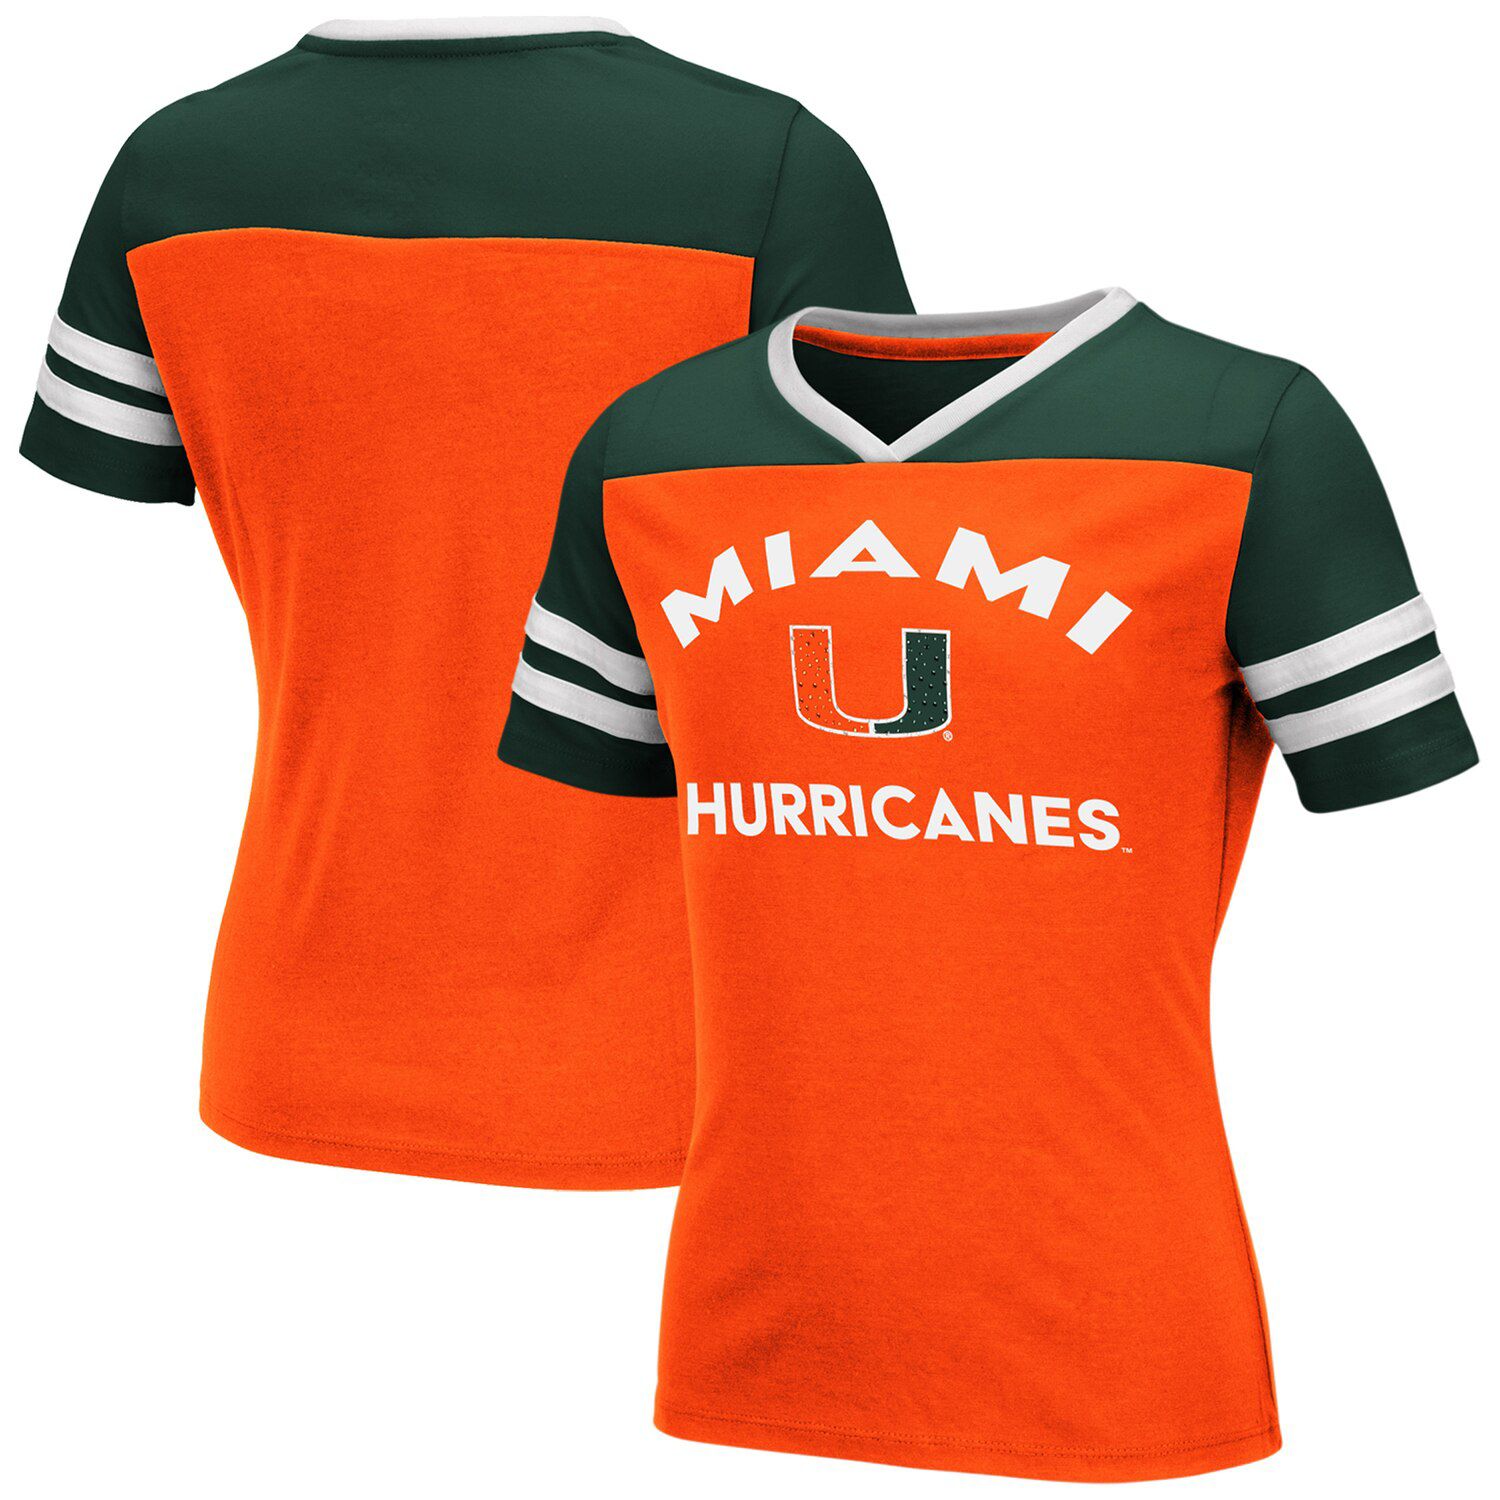 miami hurricanes youth jersey